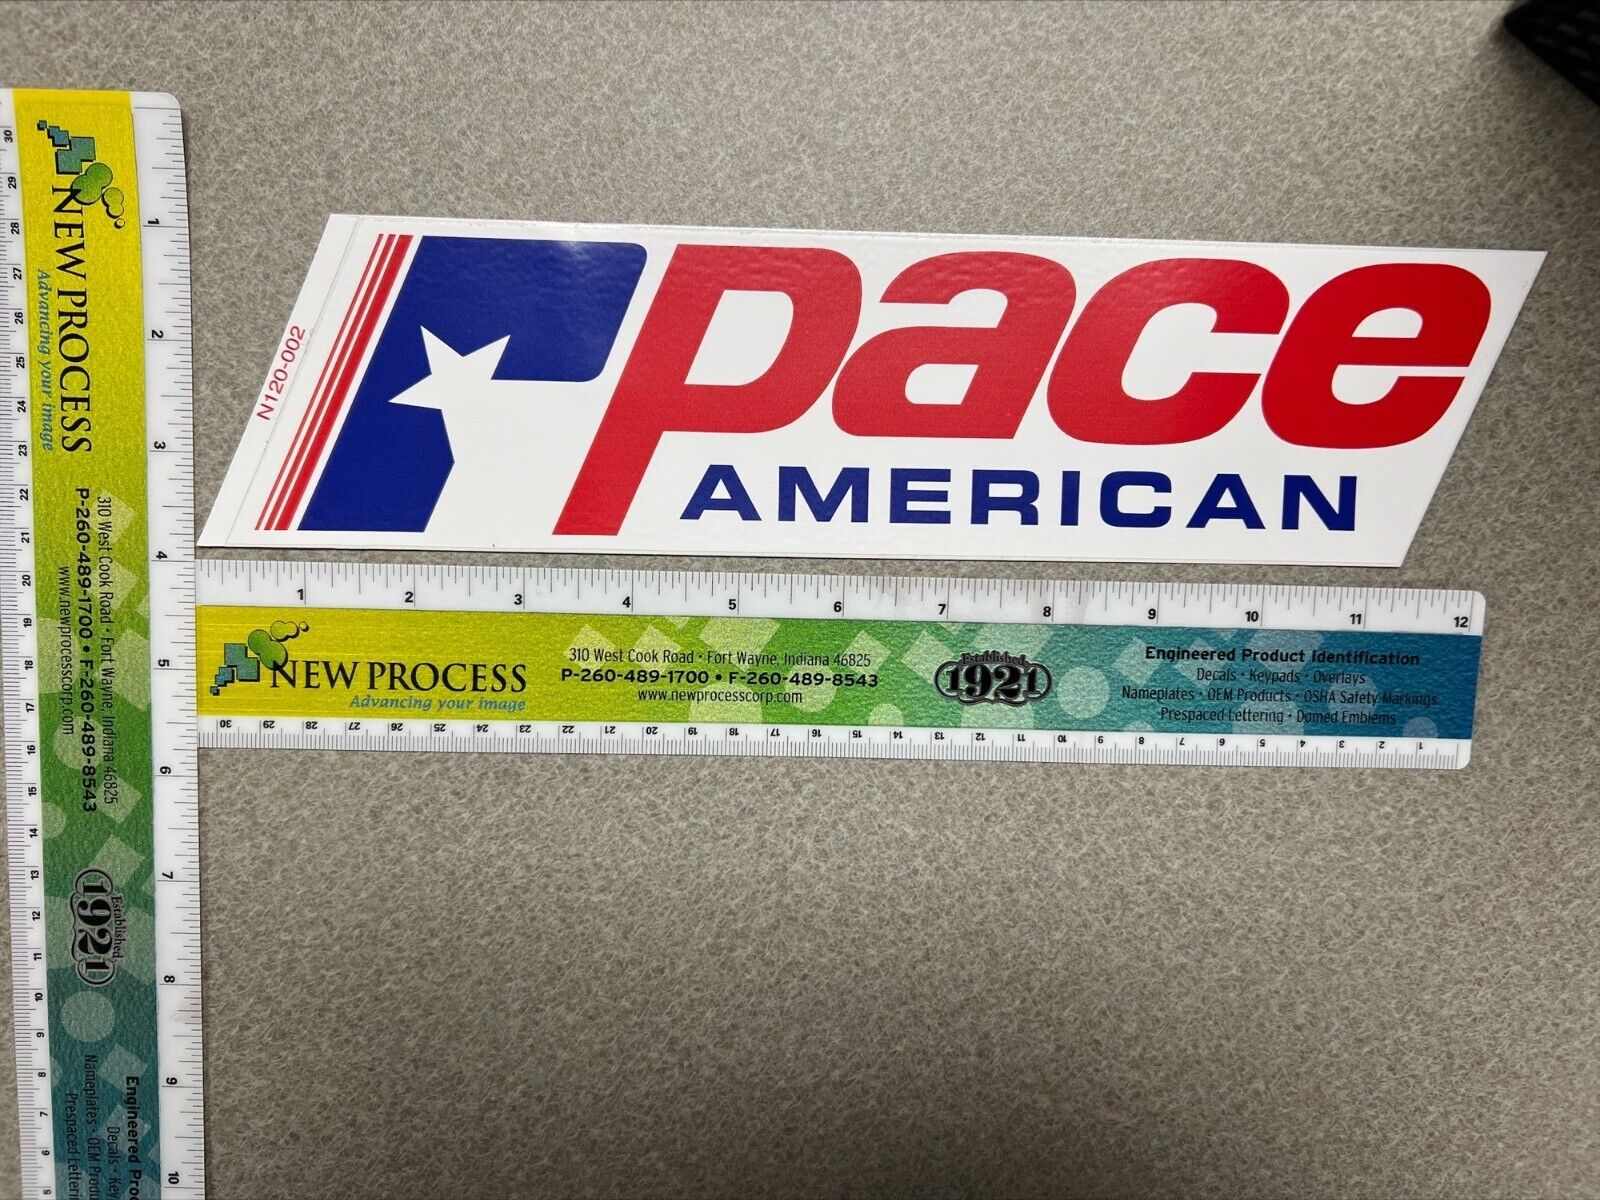 Pace Trailer - Pace American Logo - Part #670011 (from OEM supplier)